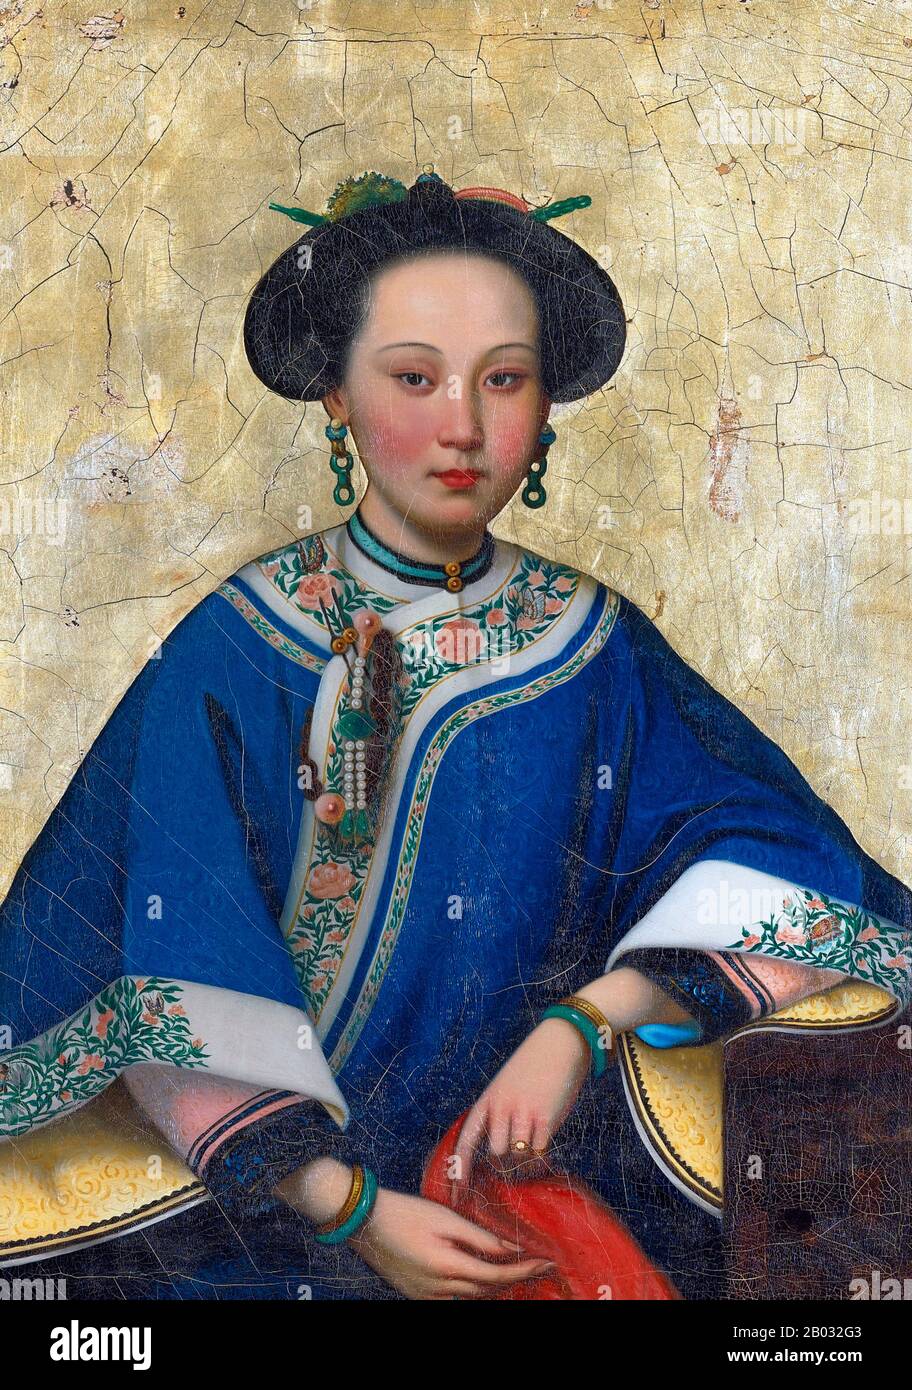 The Fragrant Concubine (Chinese: Xiāngfēi; Uyghur: Iparxan, Khoja Iparhan) is a figure in Chinese legend who was taken as a consort by the Qianlong Emperor during the 18th century. Although the stories about her are believed to be mythical, they may have been based on an actual concubine from western China who entered the harem of the emperor in 1760 and who carried the court title of Rong Fei.  Some suggest, however, that Imperial Consort Rong (whose original name may have been Maimur Azum) and Imperial Consort Xiang were different women. Han Chinese and Uyghur tellings of the legend of the F Stock Photo